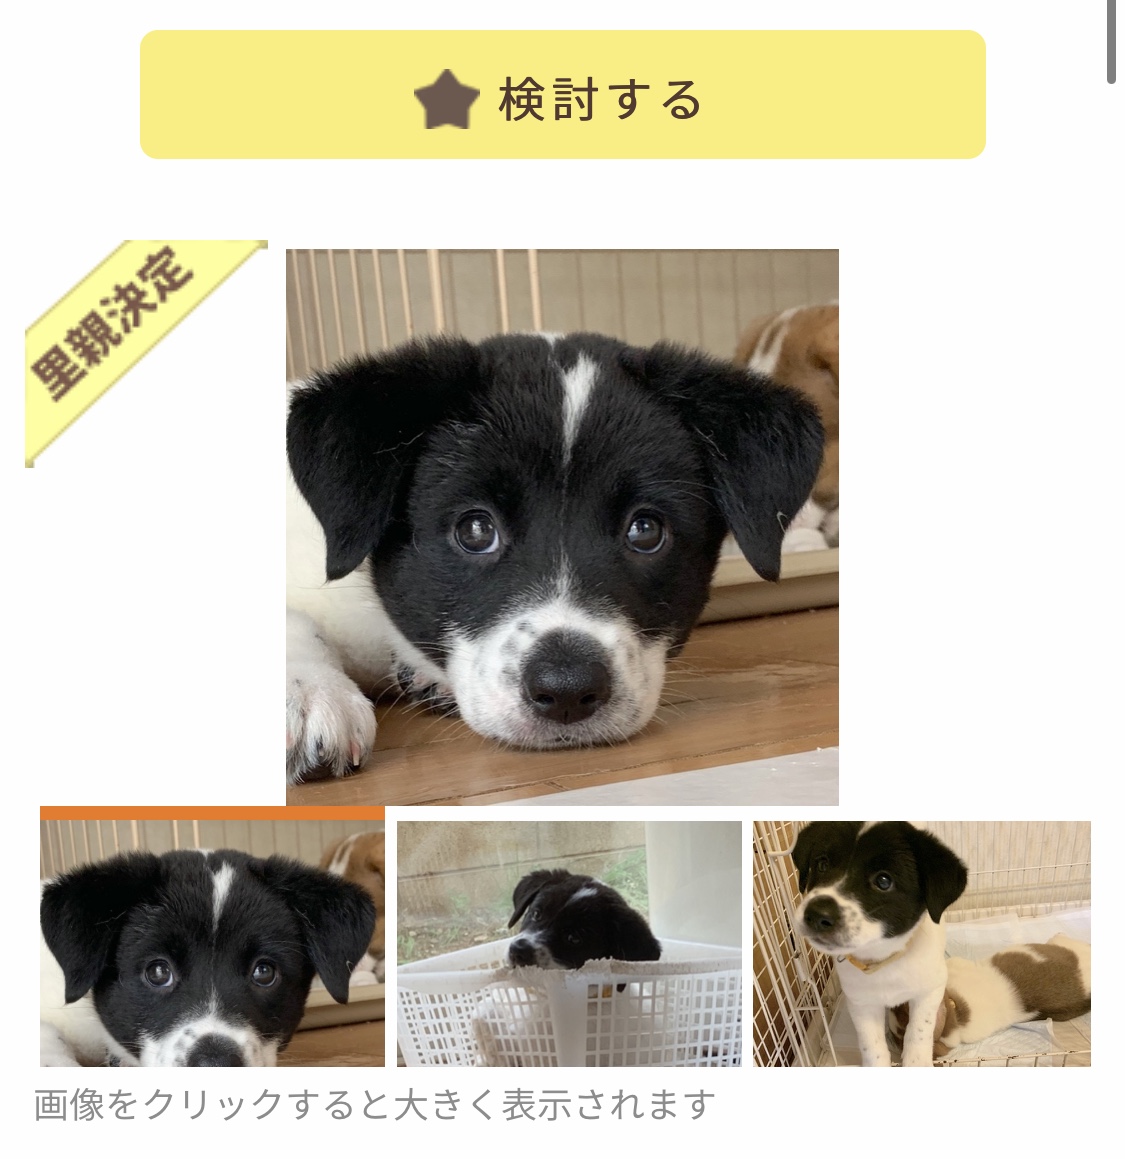 Adopting A Pet in Tokyo / How and Where Can I Find A Pet?! - Apts.jp